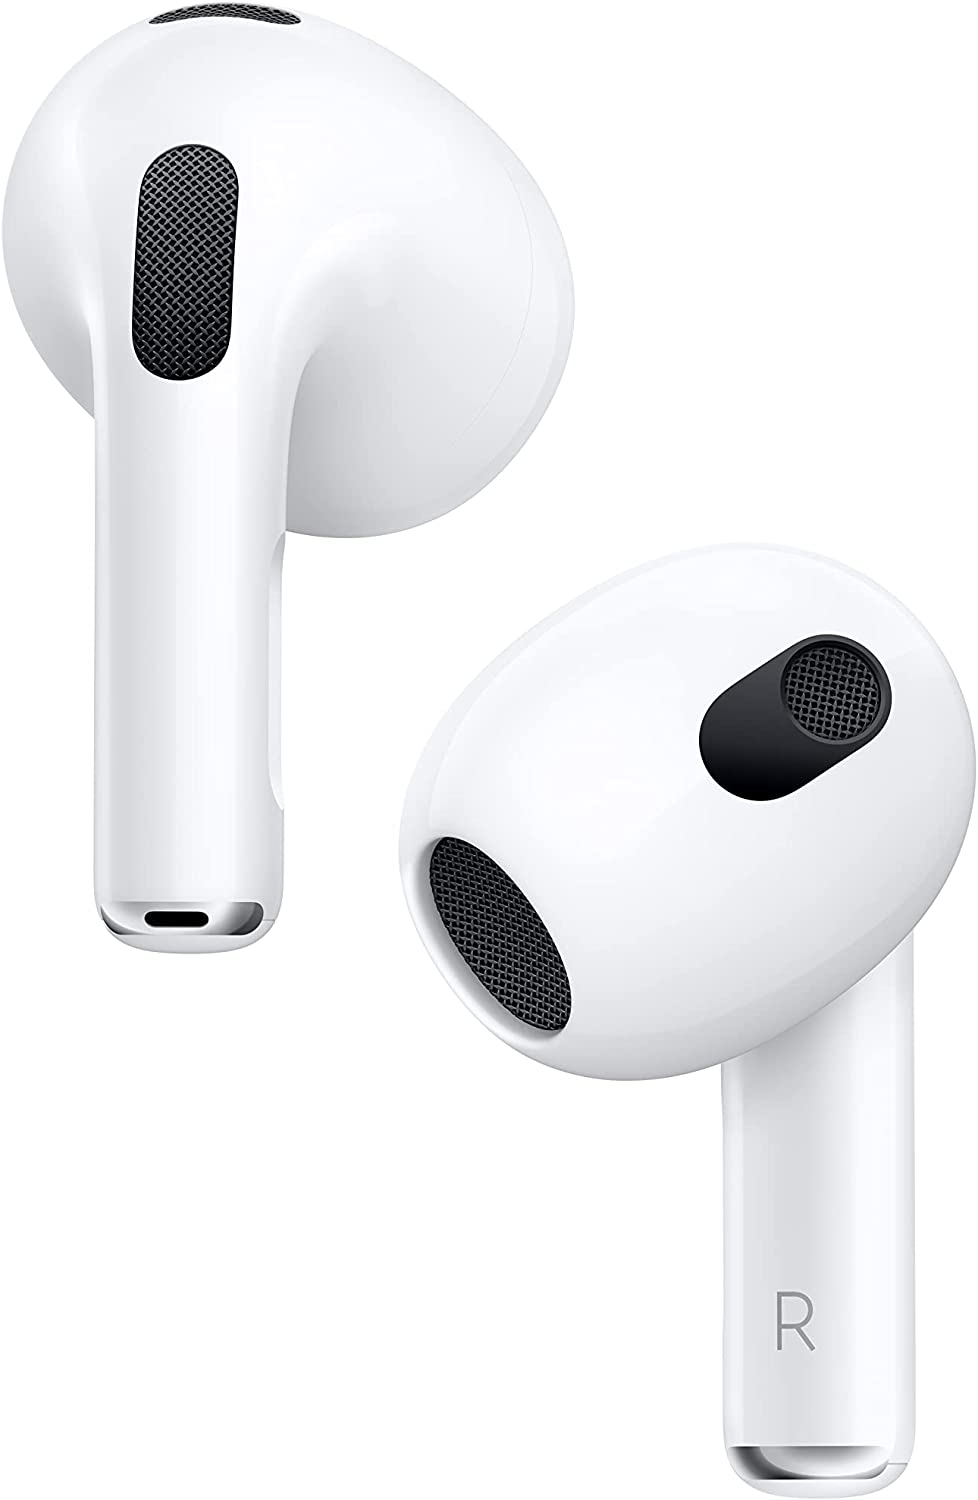 Apple AirPods (3rd Generation) $150 + Free Shipping